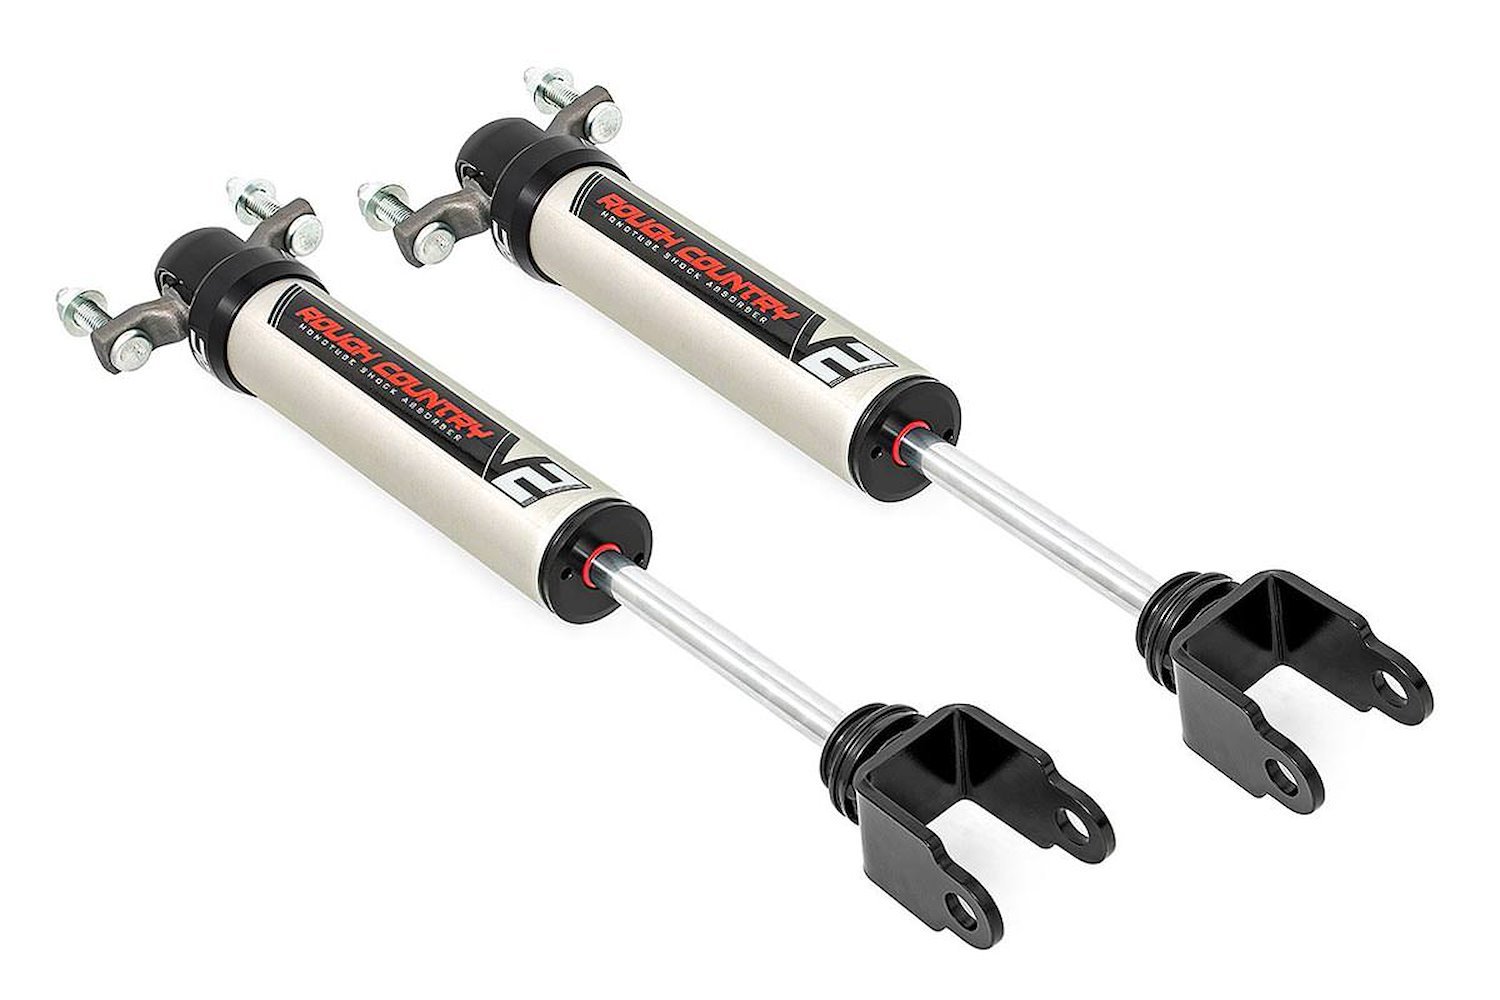 760837_A V2 Front Shocks, 5-8", OEM Mount, Fits Select Chevy/GMC 2500HD/3500HD